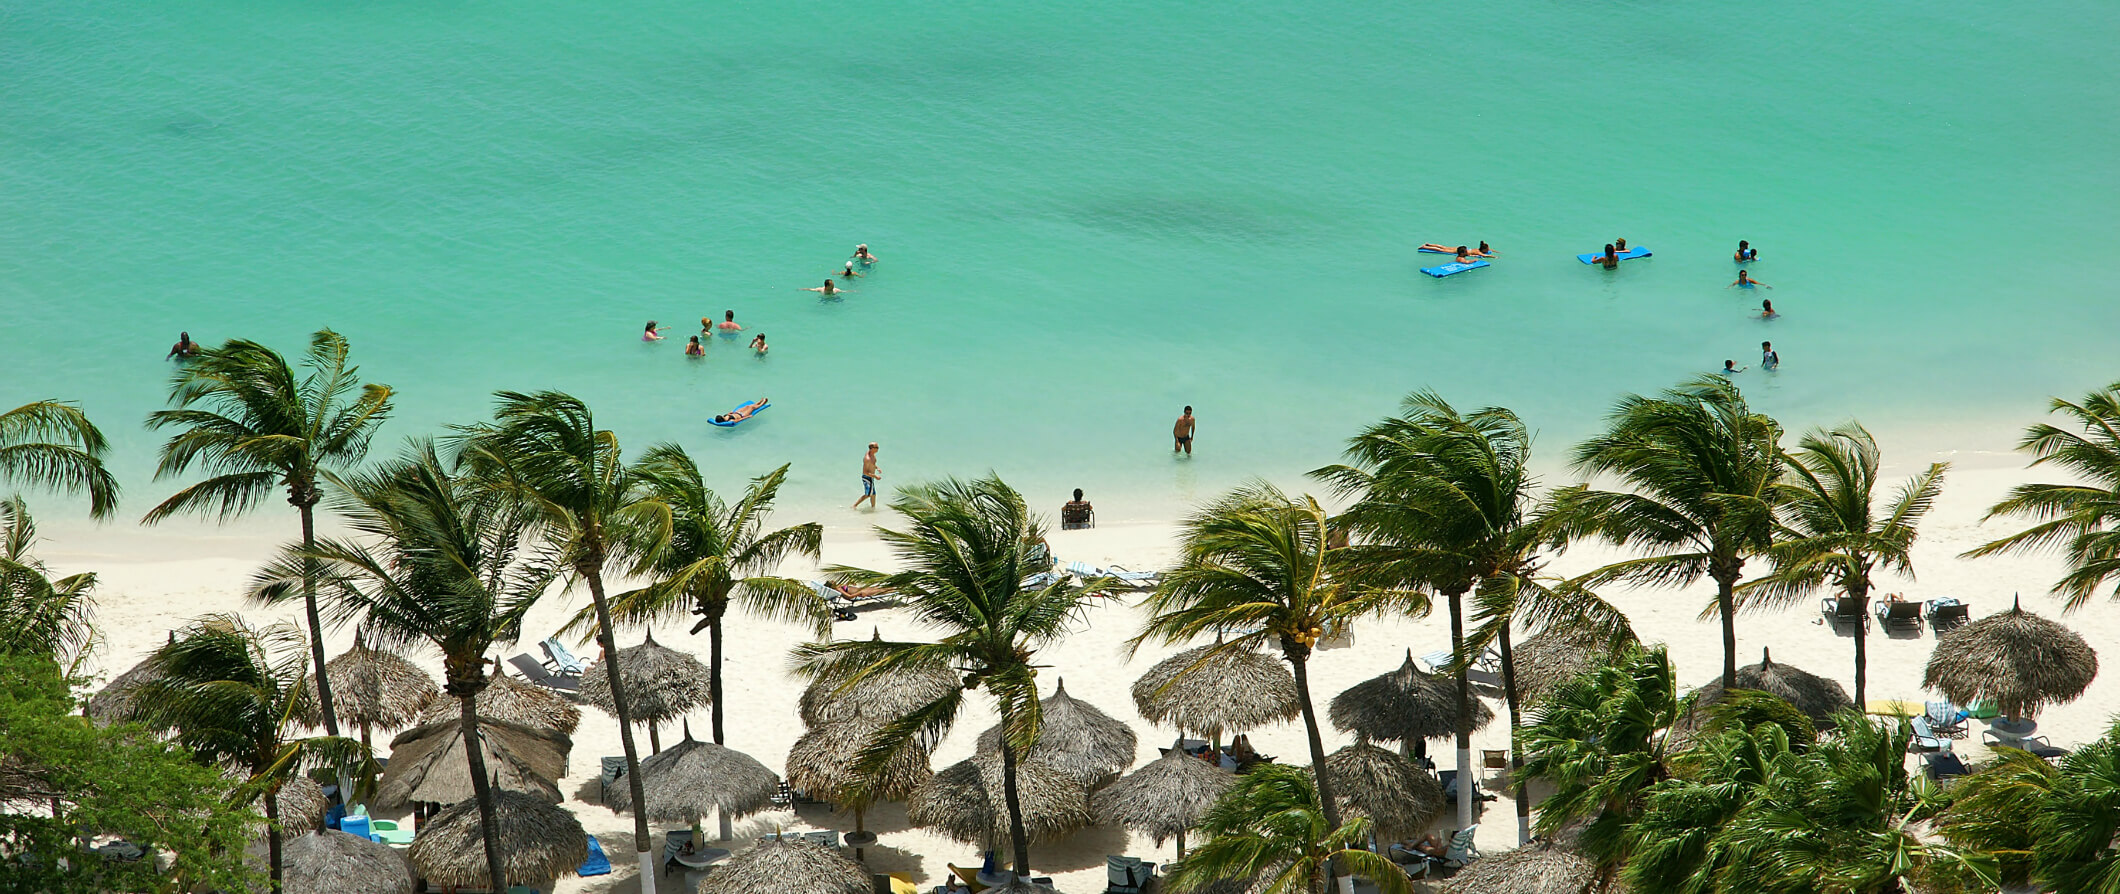 The Best Things To Do In Aruba On A Short Visit